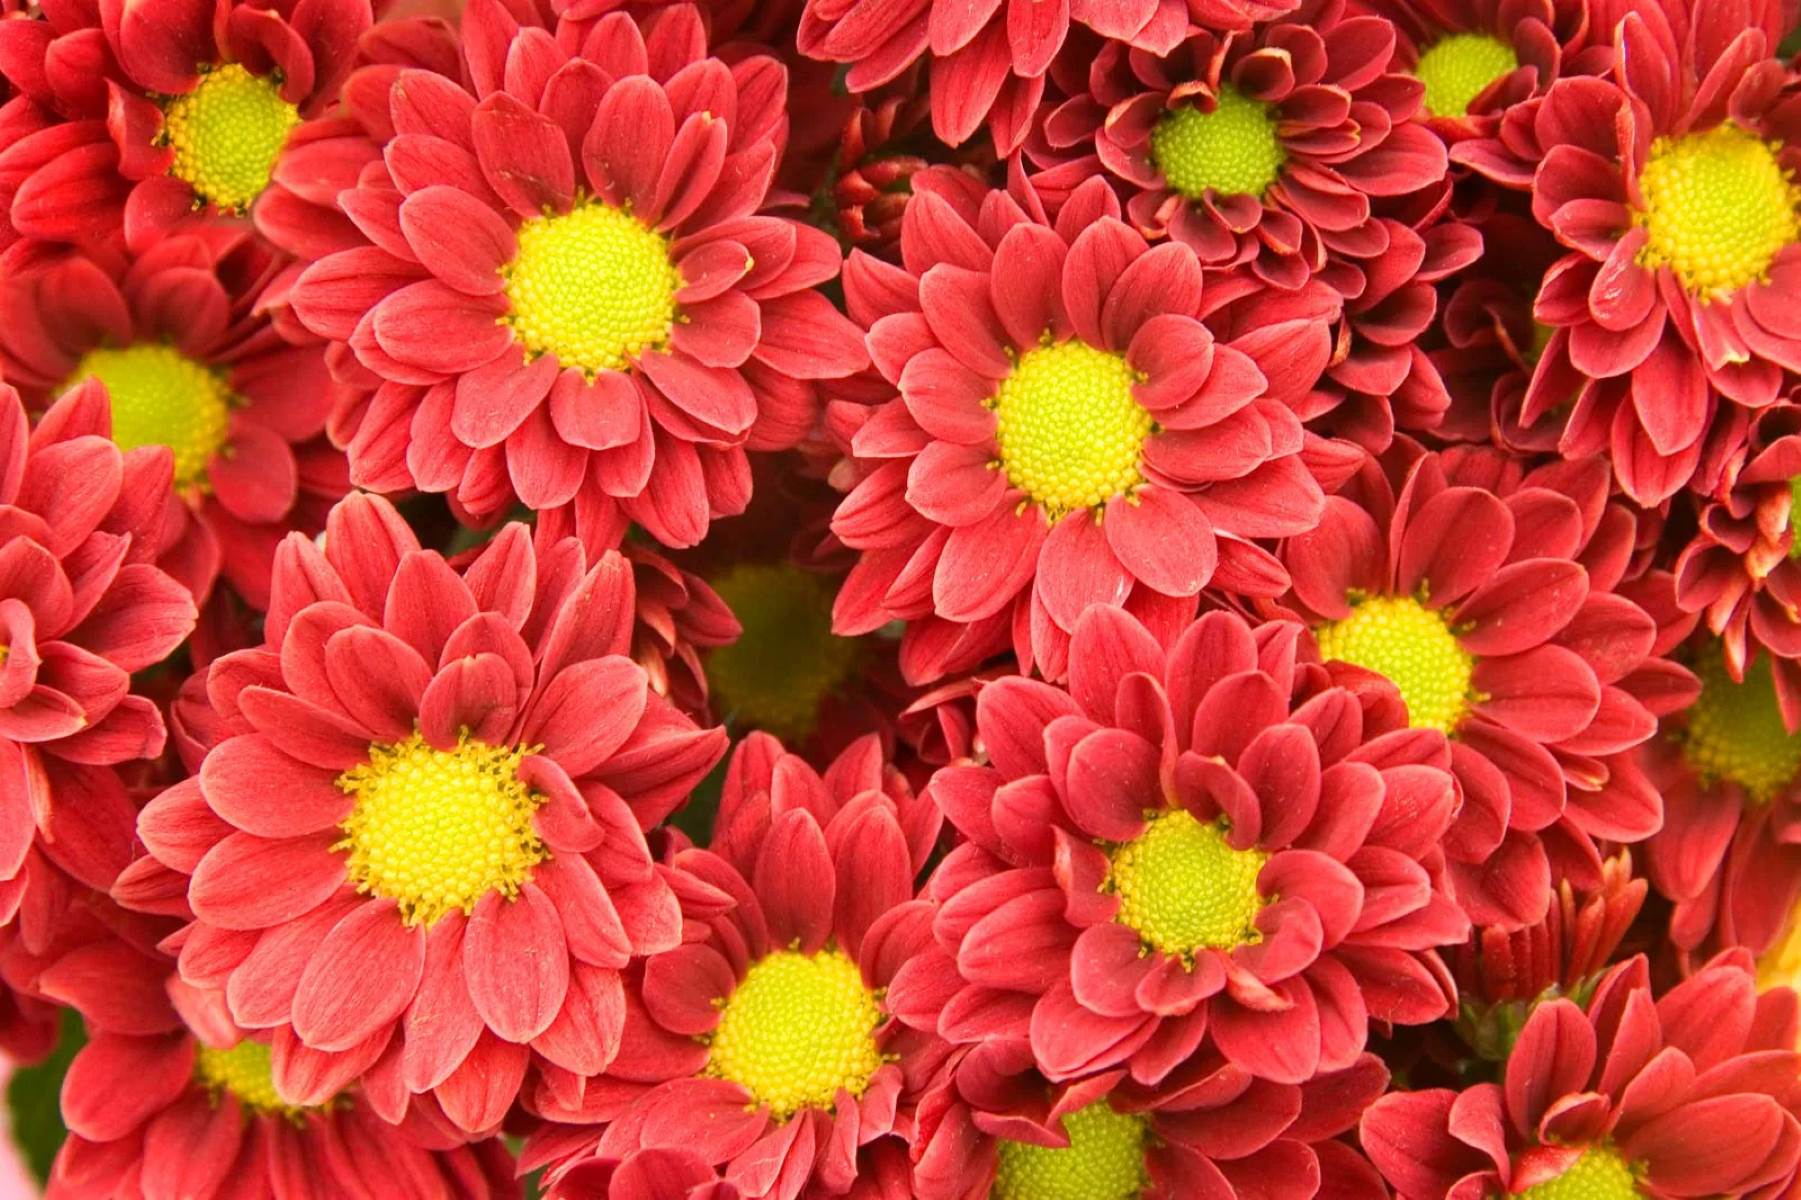 When To Plant Chrysanthemum Seeds